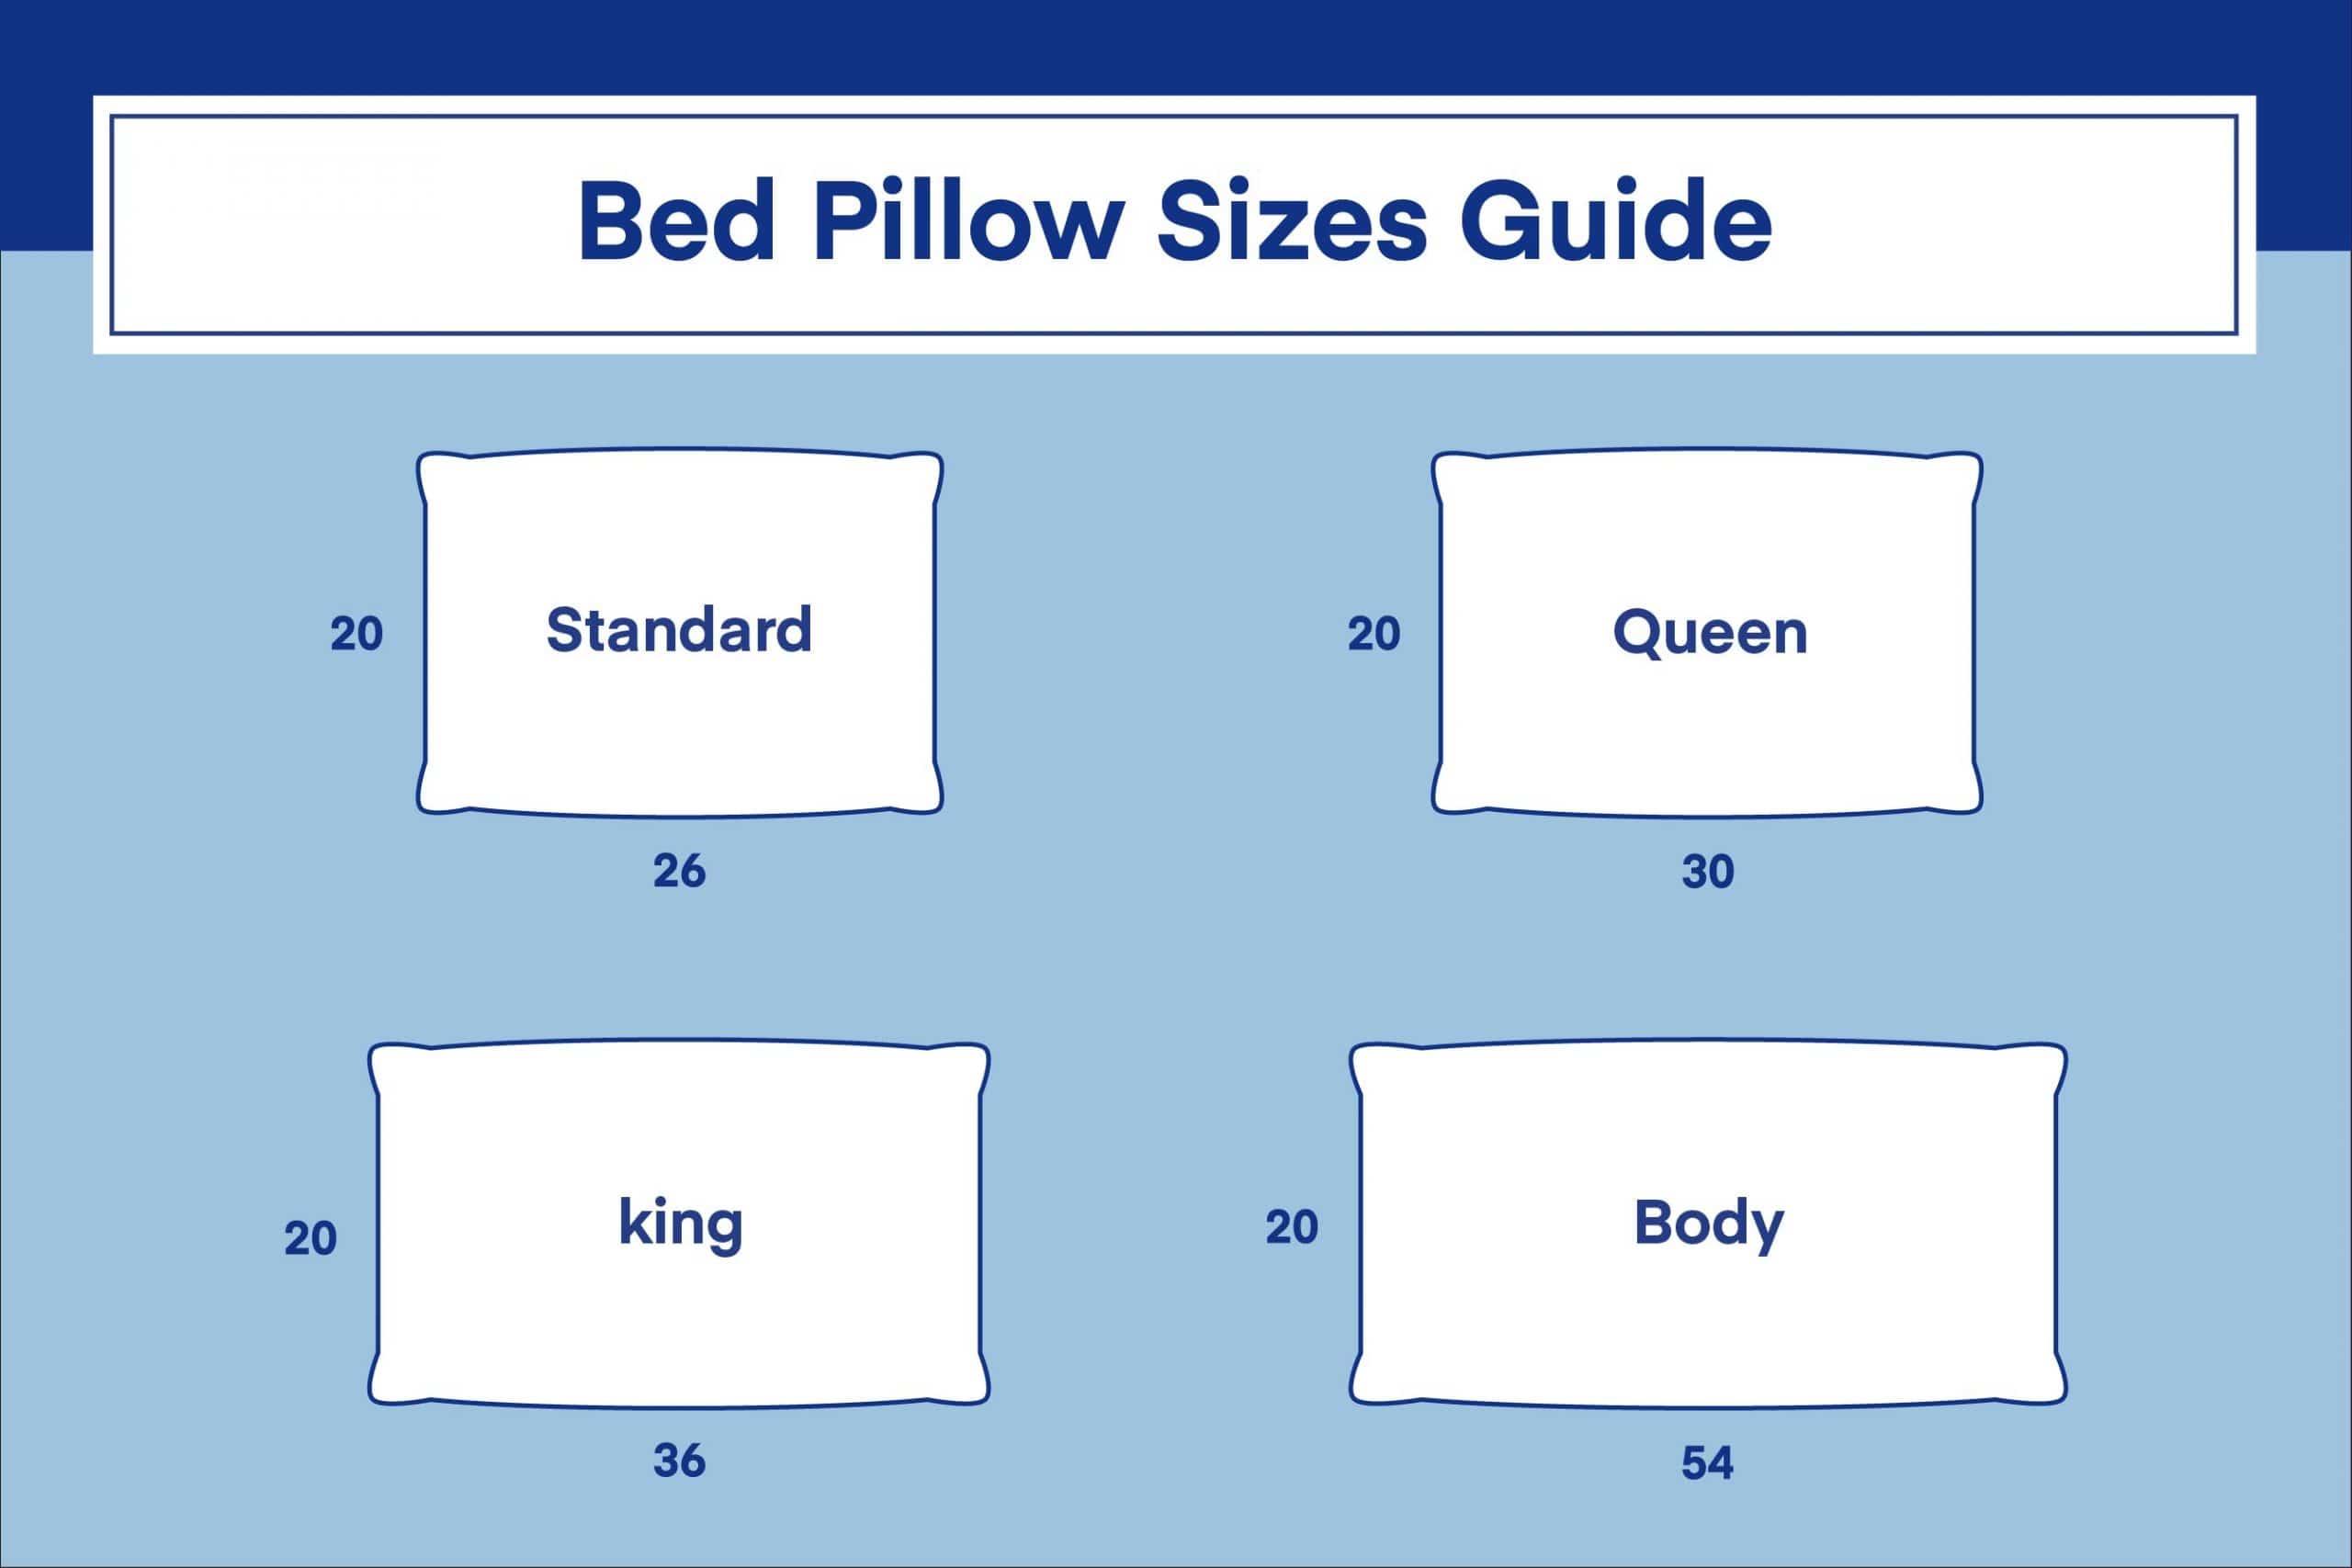 Bed Pillow Sizes Guide Amerisleep,Spiced Tea And Milk Drink Originally Made In India